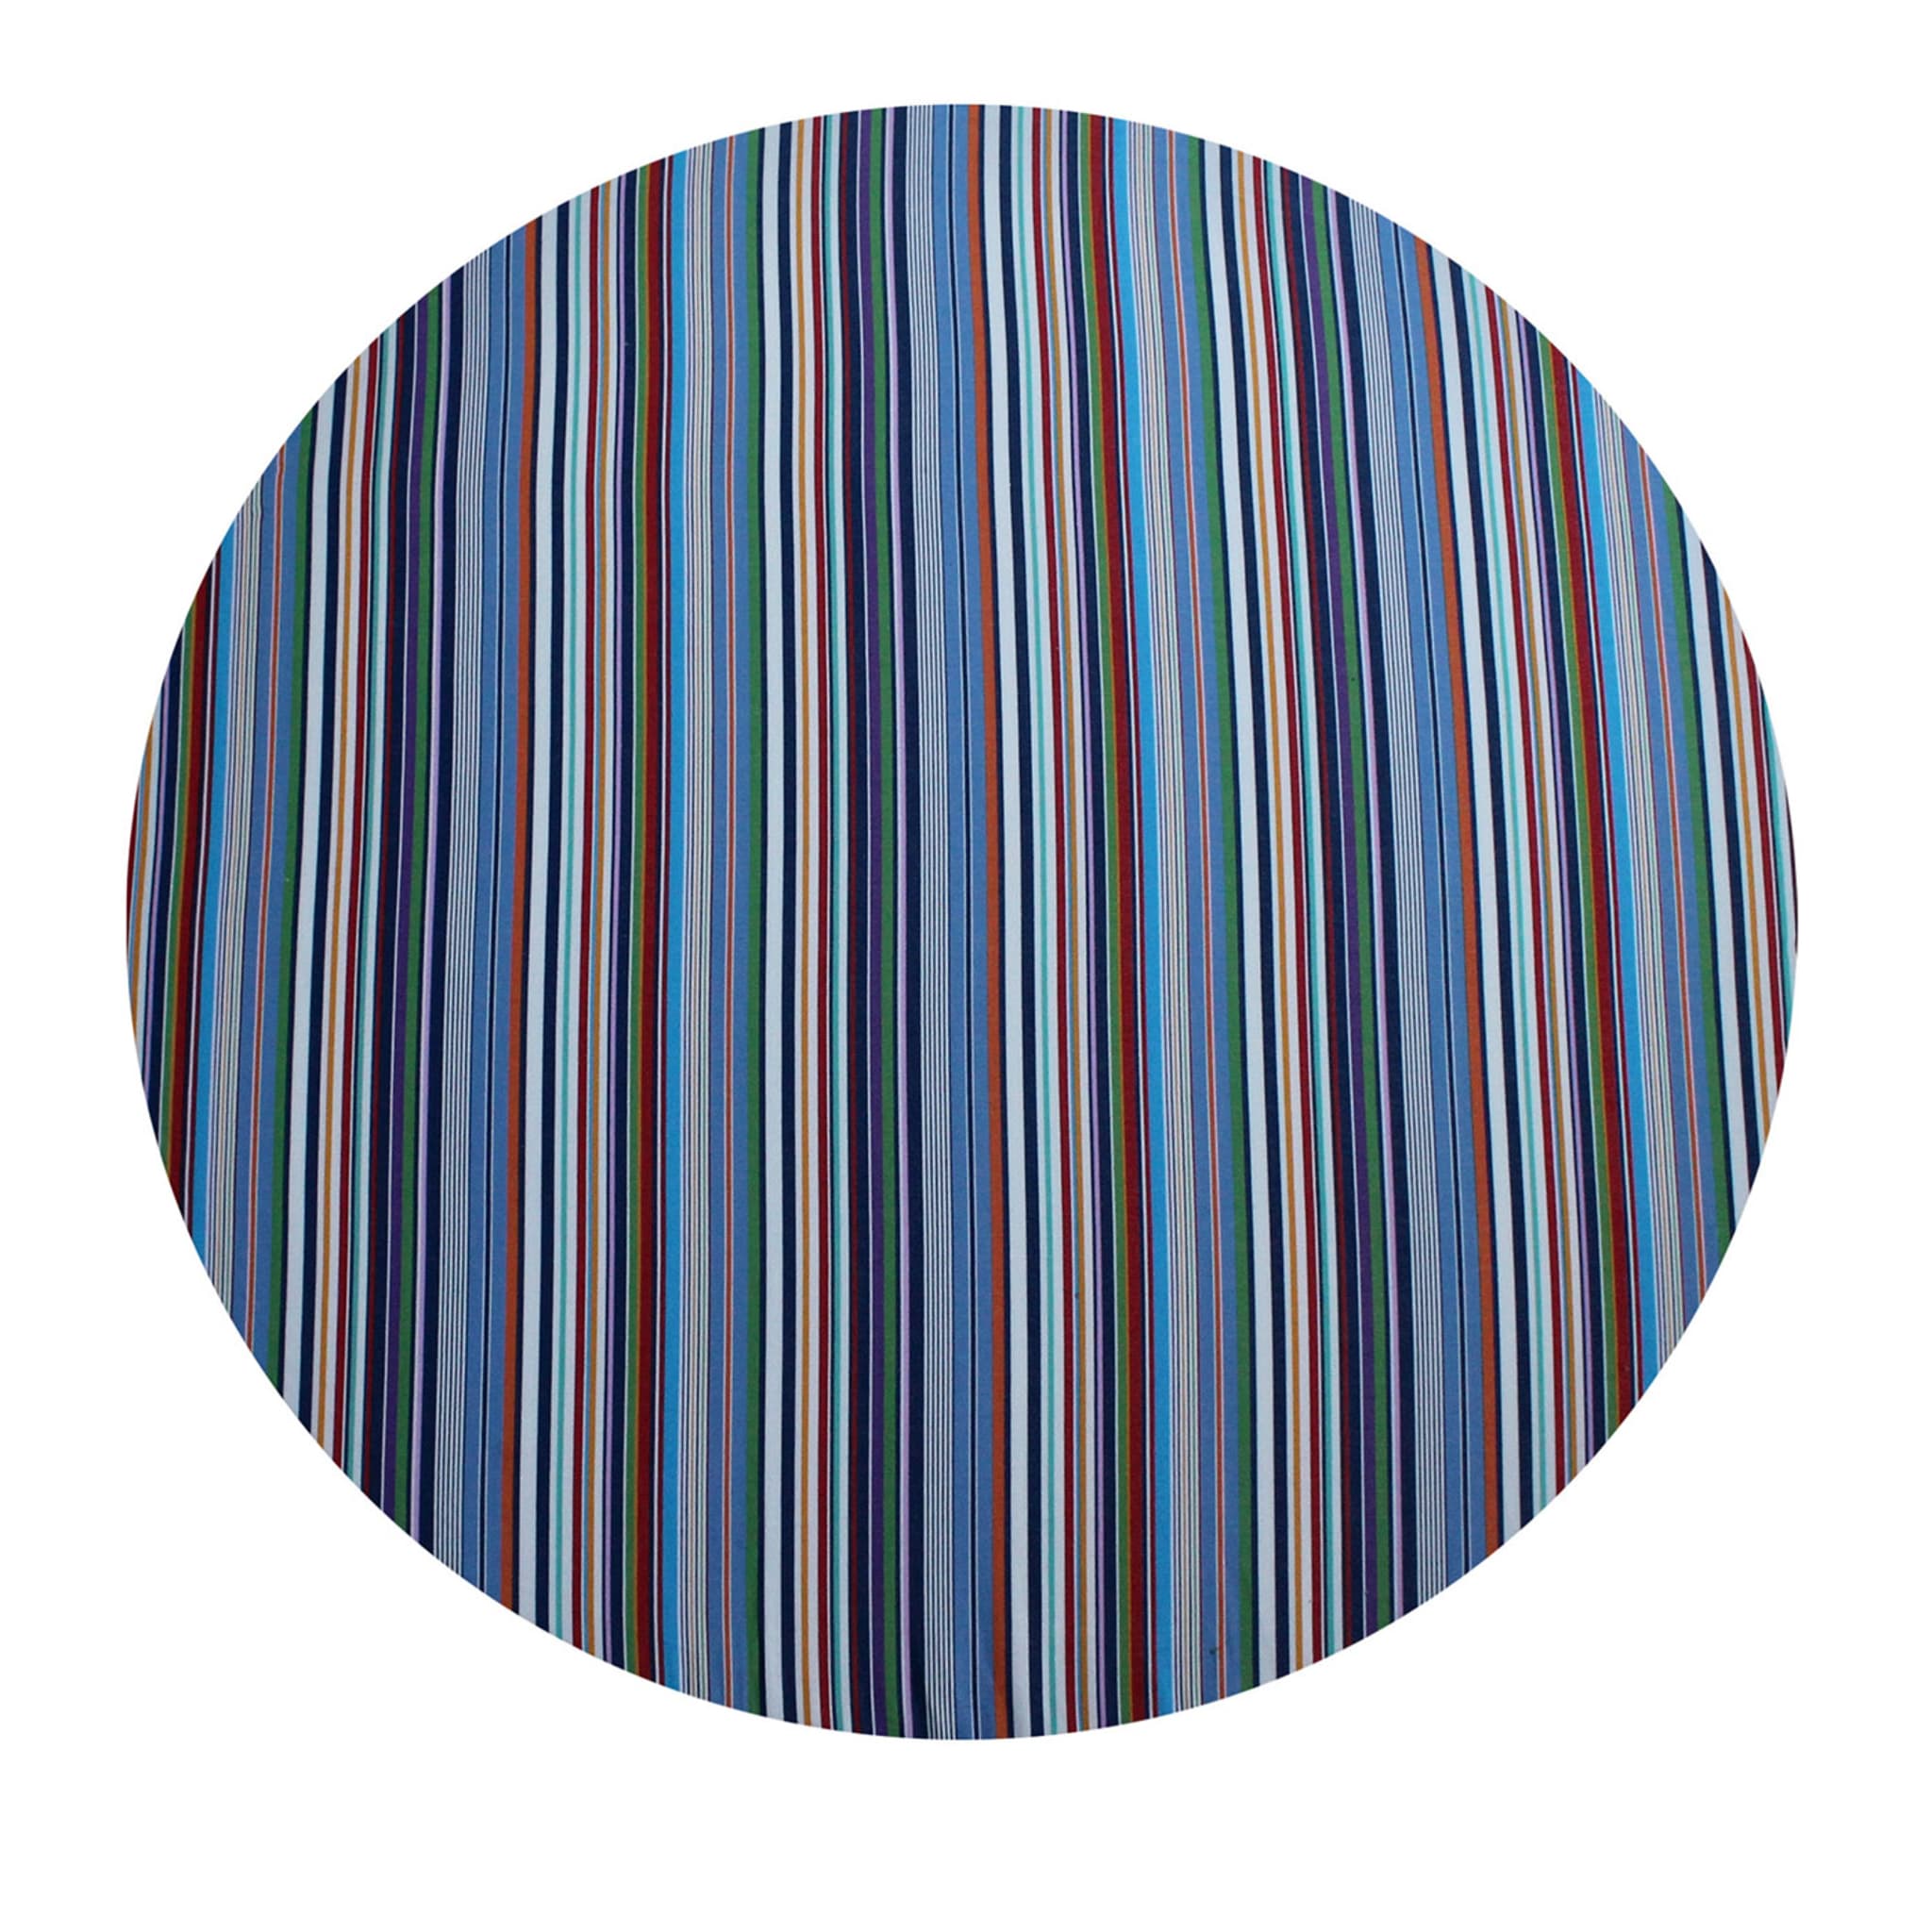 Cuffiette Striped Round Polychrome Placemat - Main view